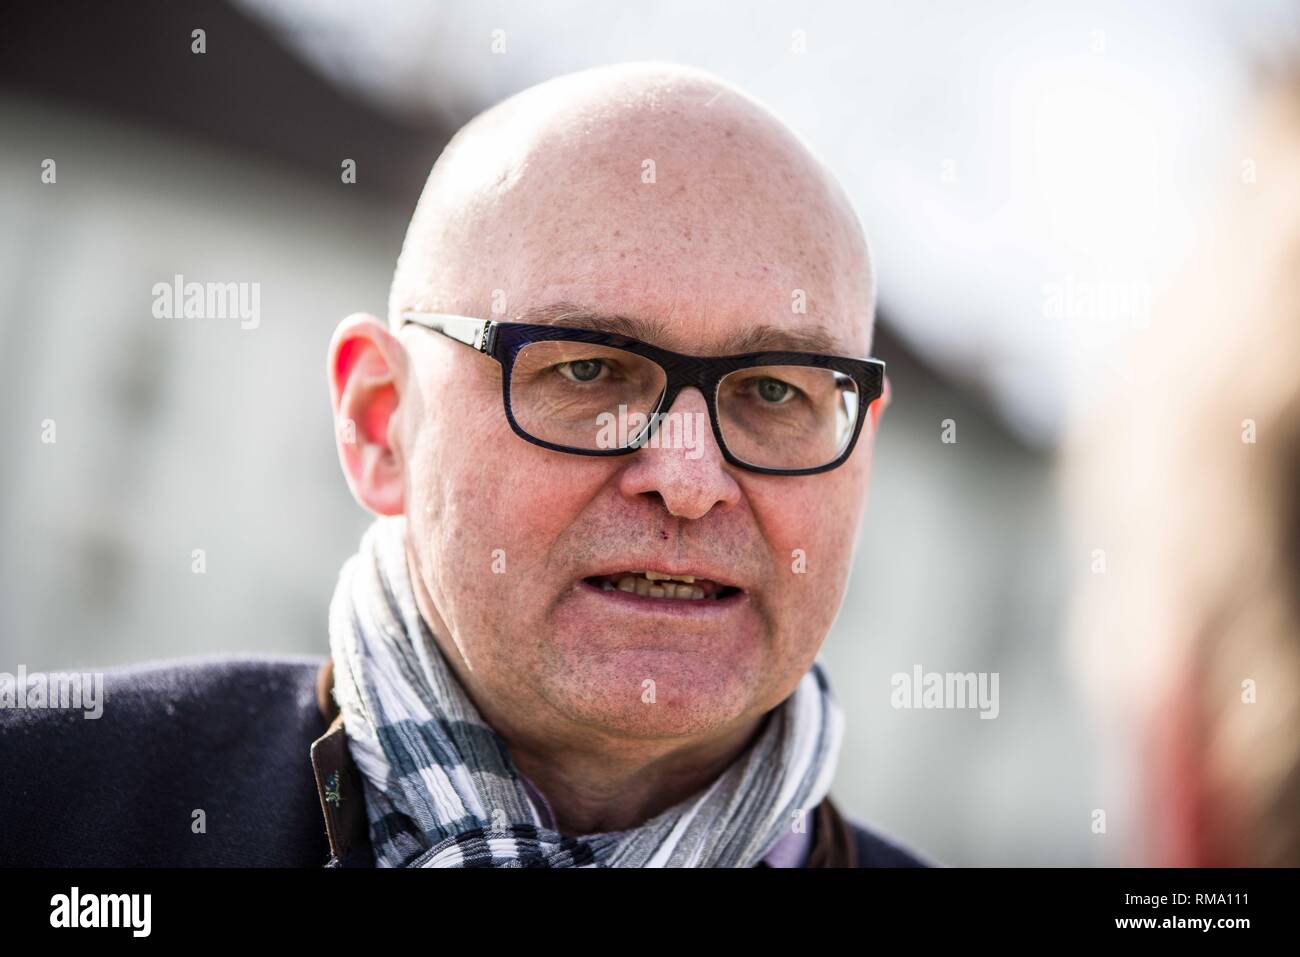 Munich, Bavaria, Germany. 14th Feb, 2019. HEINRICH BIRNER of the Verdi union in Munich. To signify the failure of the second round of talks with employers, the German Verdi Ver.di labor union organized a 200  strong flashmob action at the famed Schloss Nymphenburg in Munich to kick off a new strike wave. Credit: ZUMA Press, Inc./Alamy Live News Stock Photo